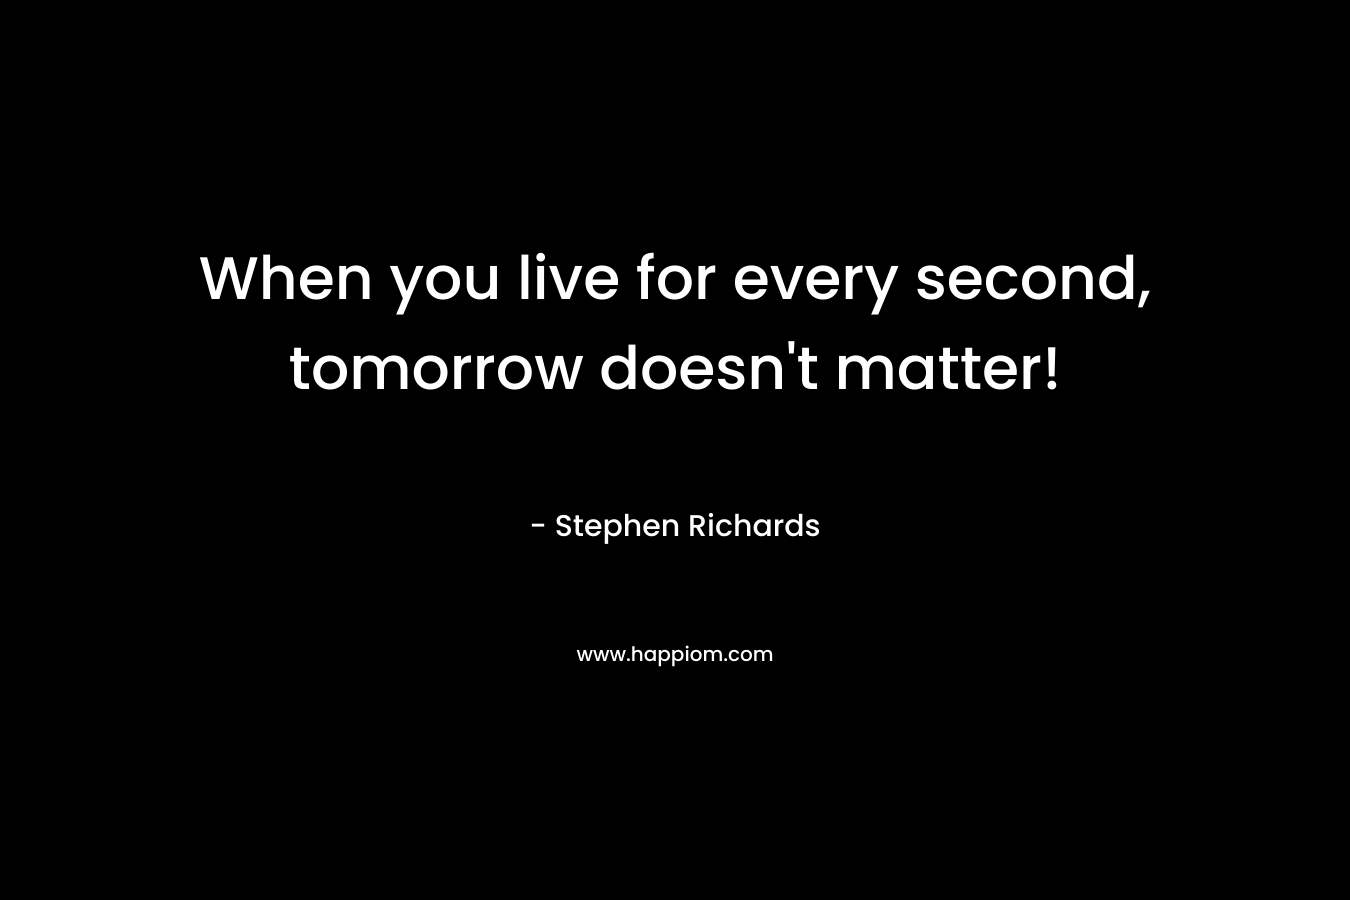 When you live for every second, tomorrow doesn't matter!